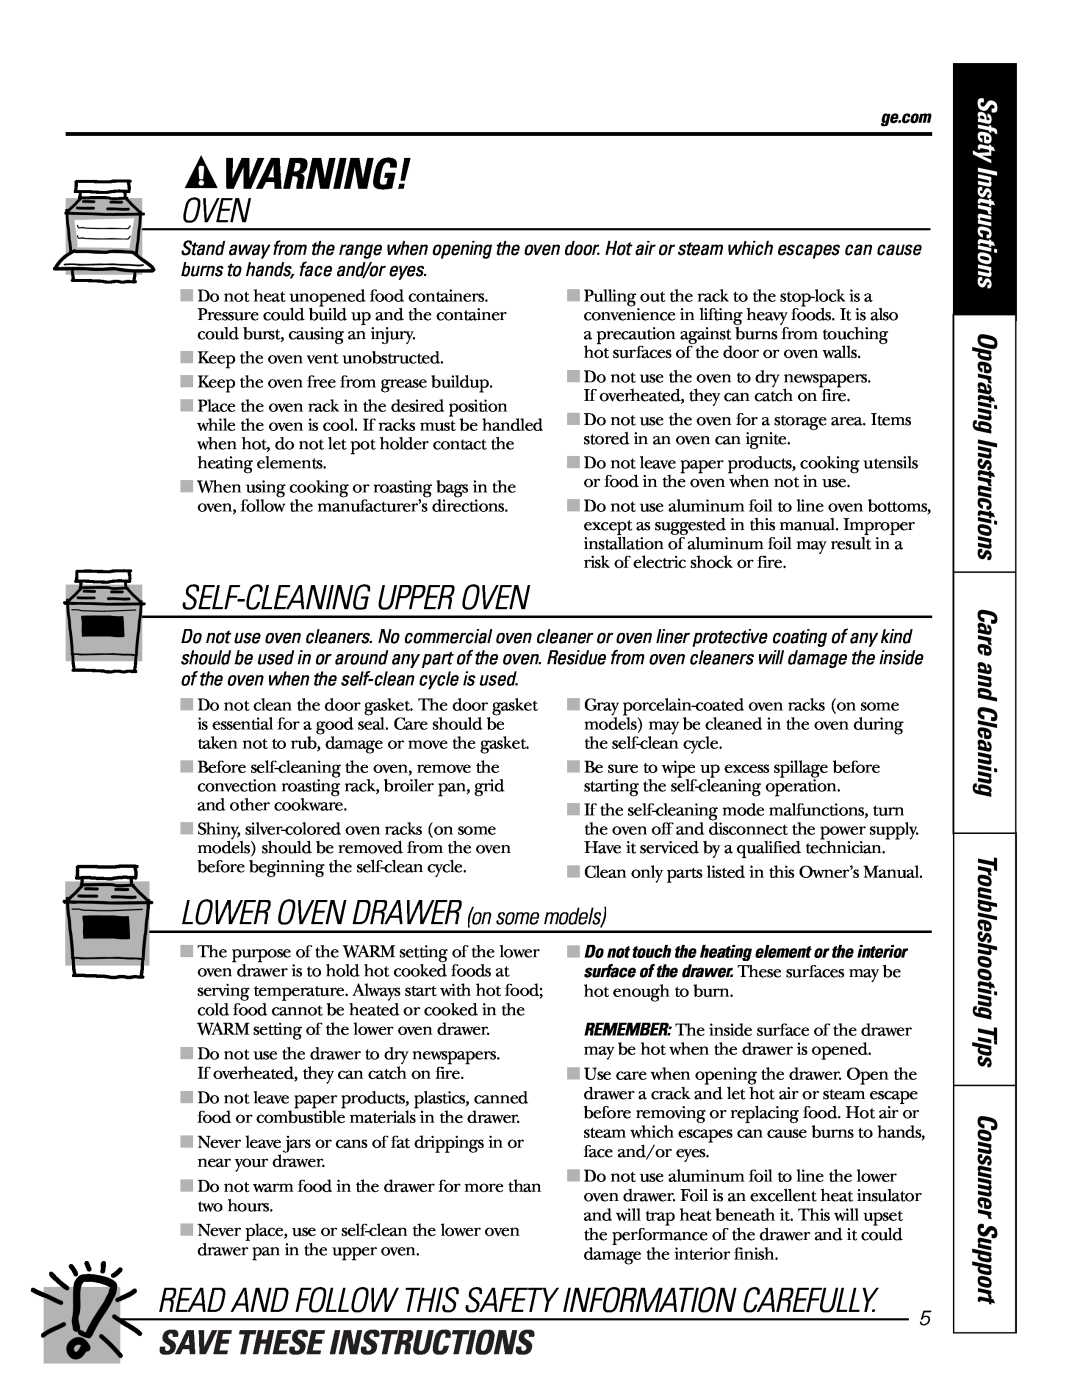 GE JB968 Self-Cleaning Upper Oven, LOWER OVEN DRAWER on some models, Save These Instructions, Operating Instructions 